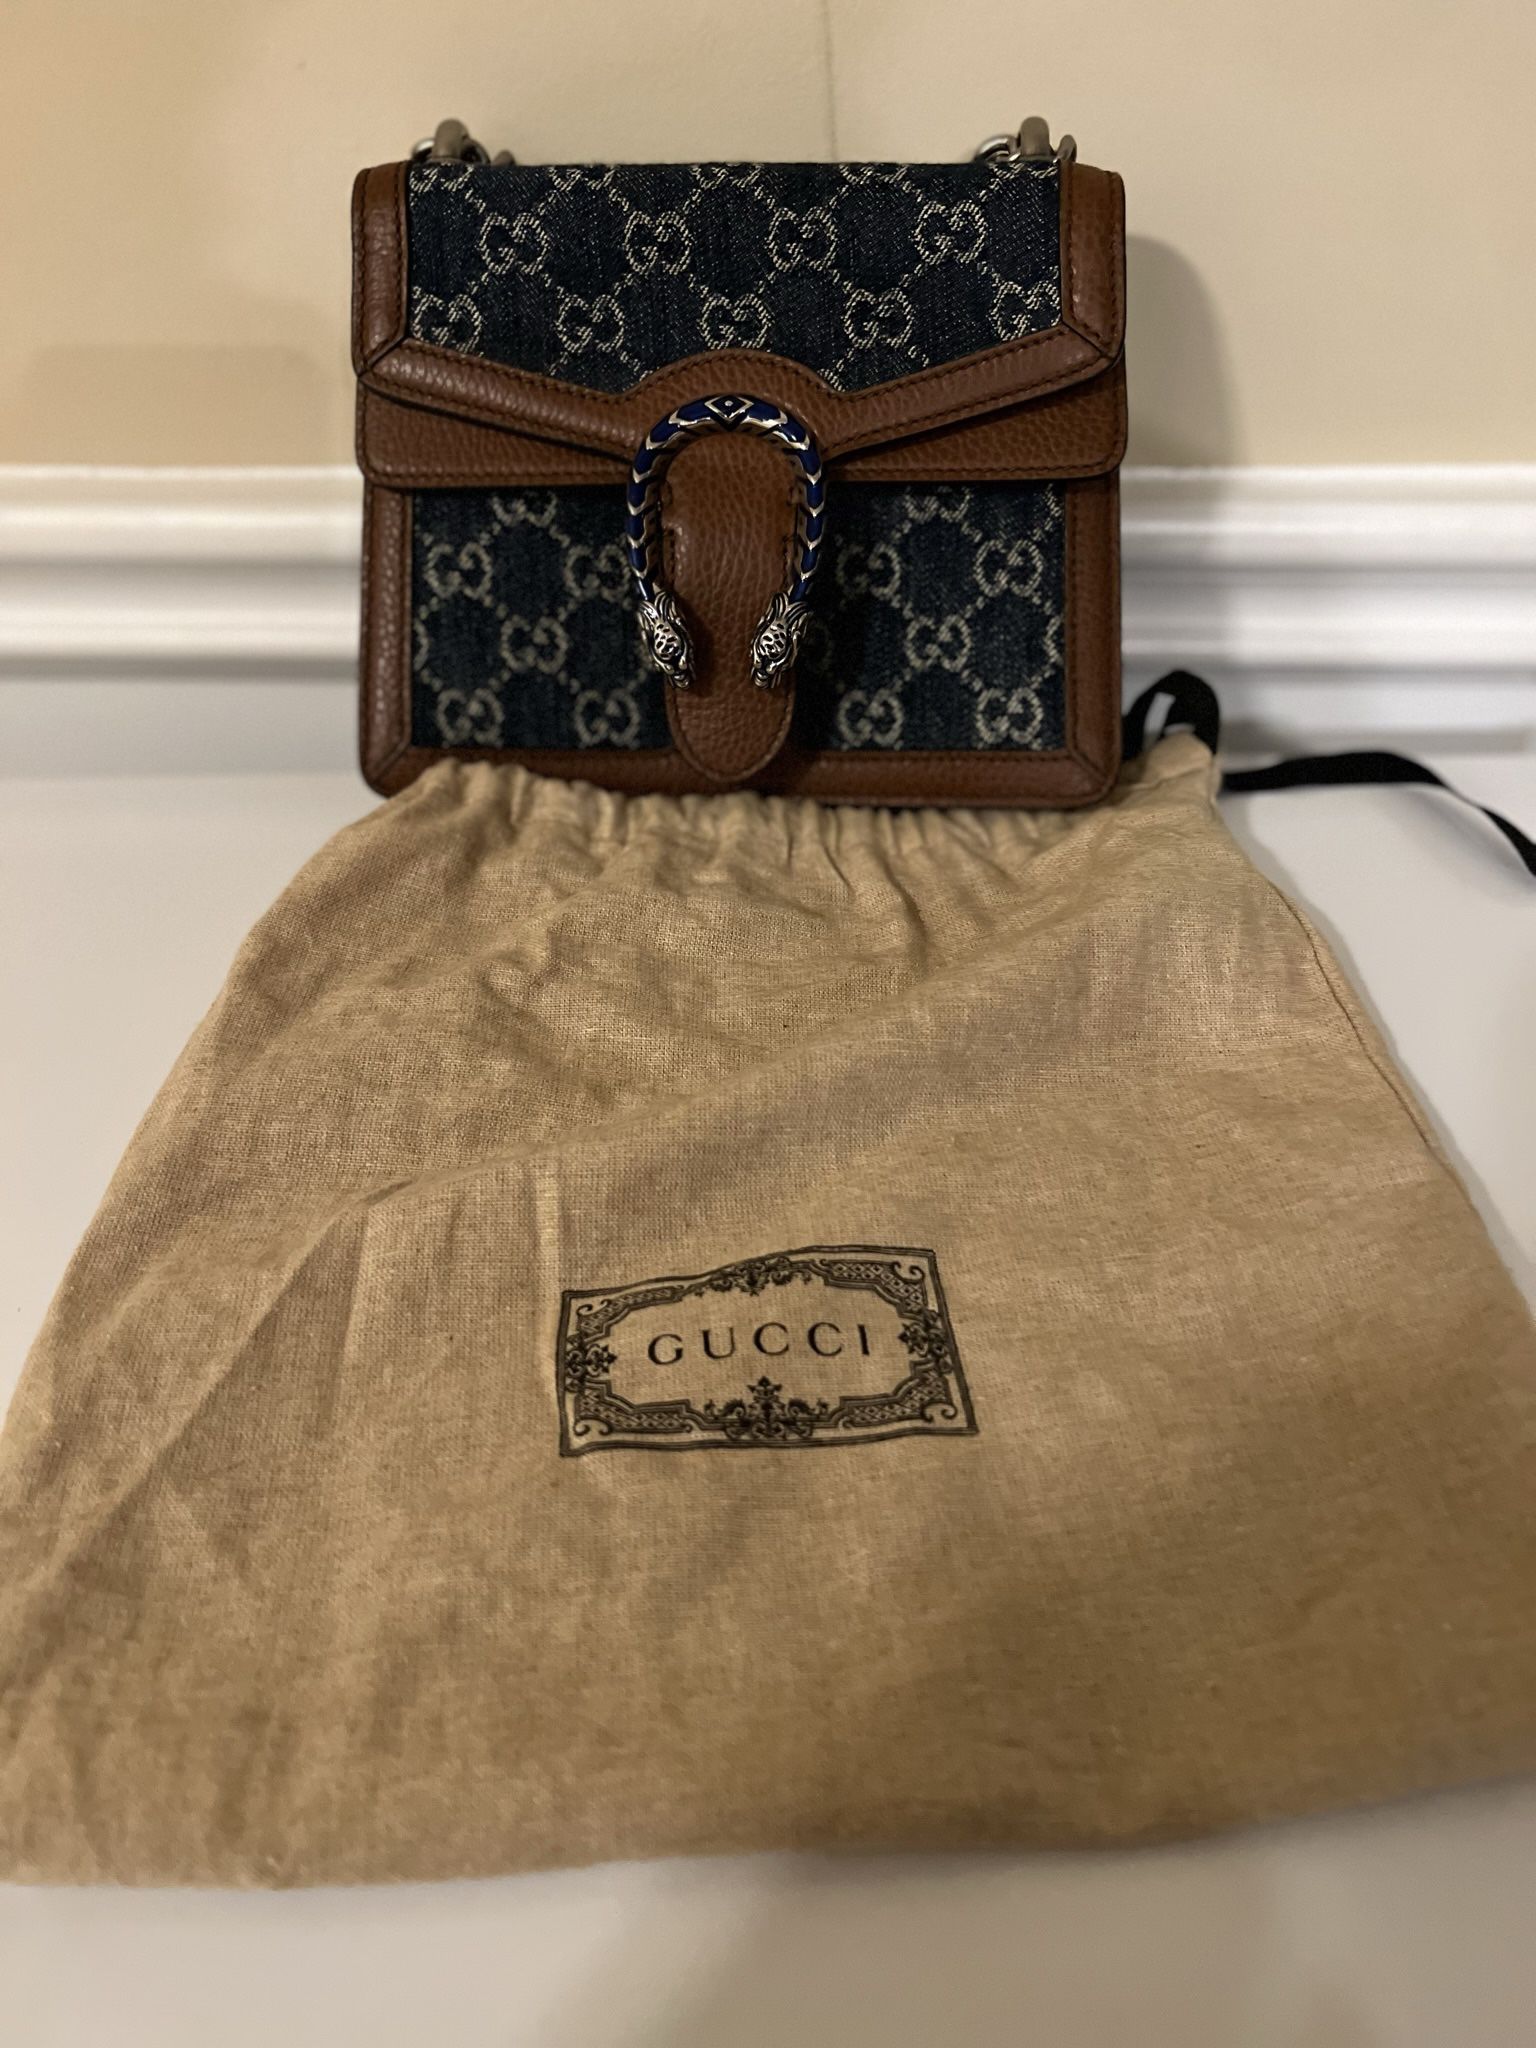 Gucci Bag - serial Number D0(contact info removed)7